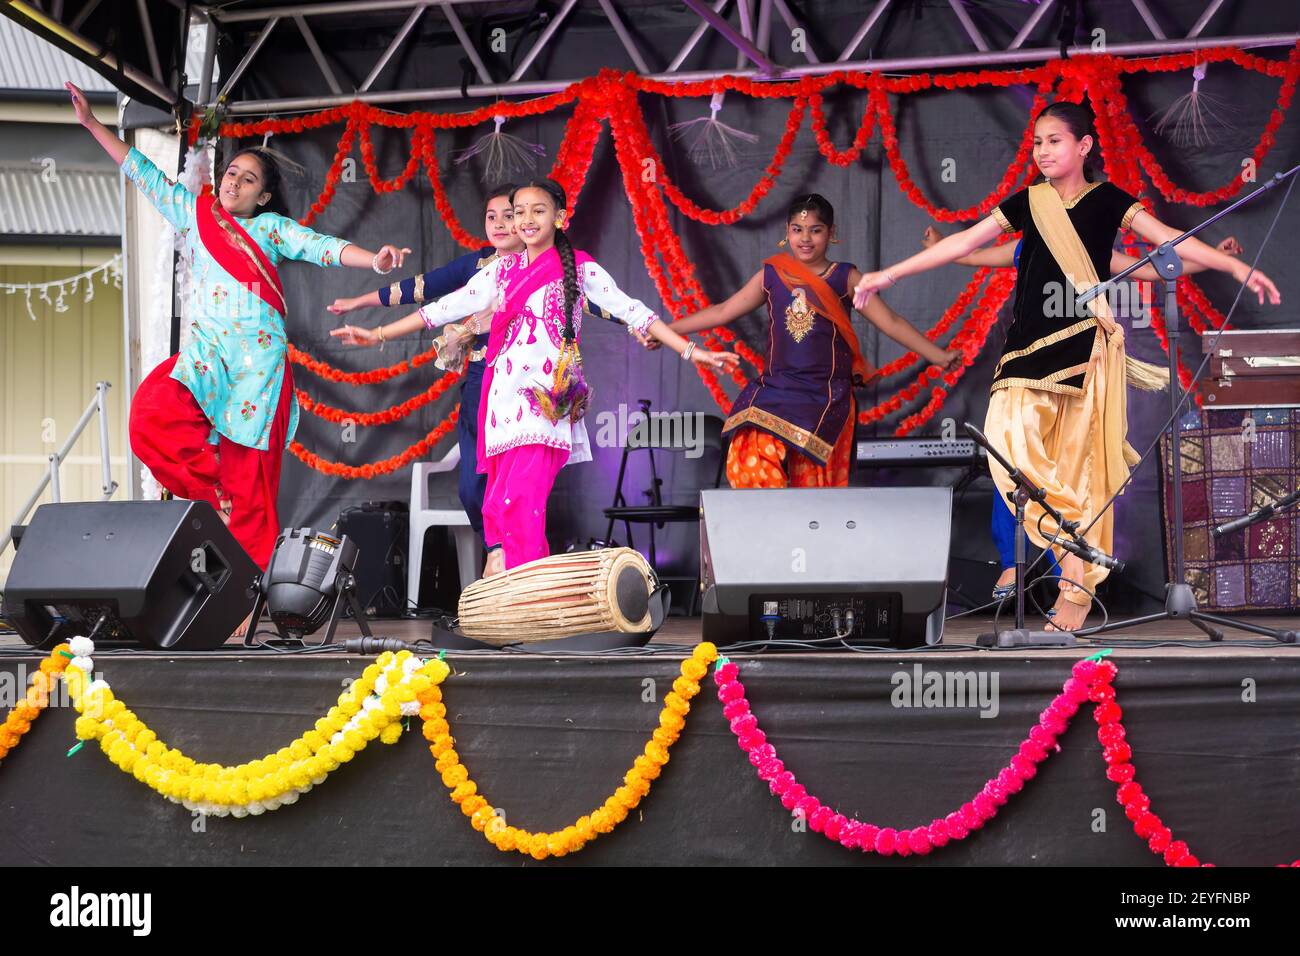 Young Indian girls dancing on stage to celebrate Diwali, the Hindu festival of lights Stock Photo